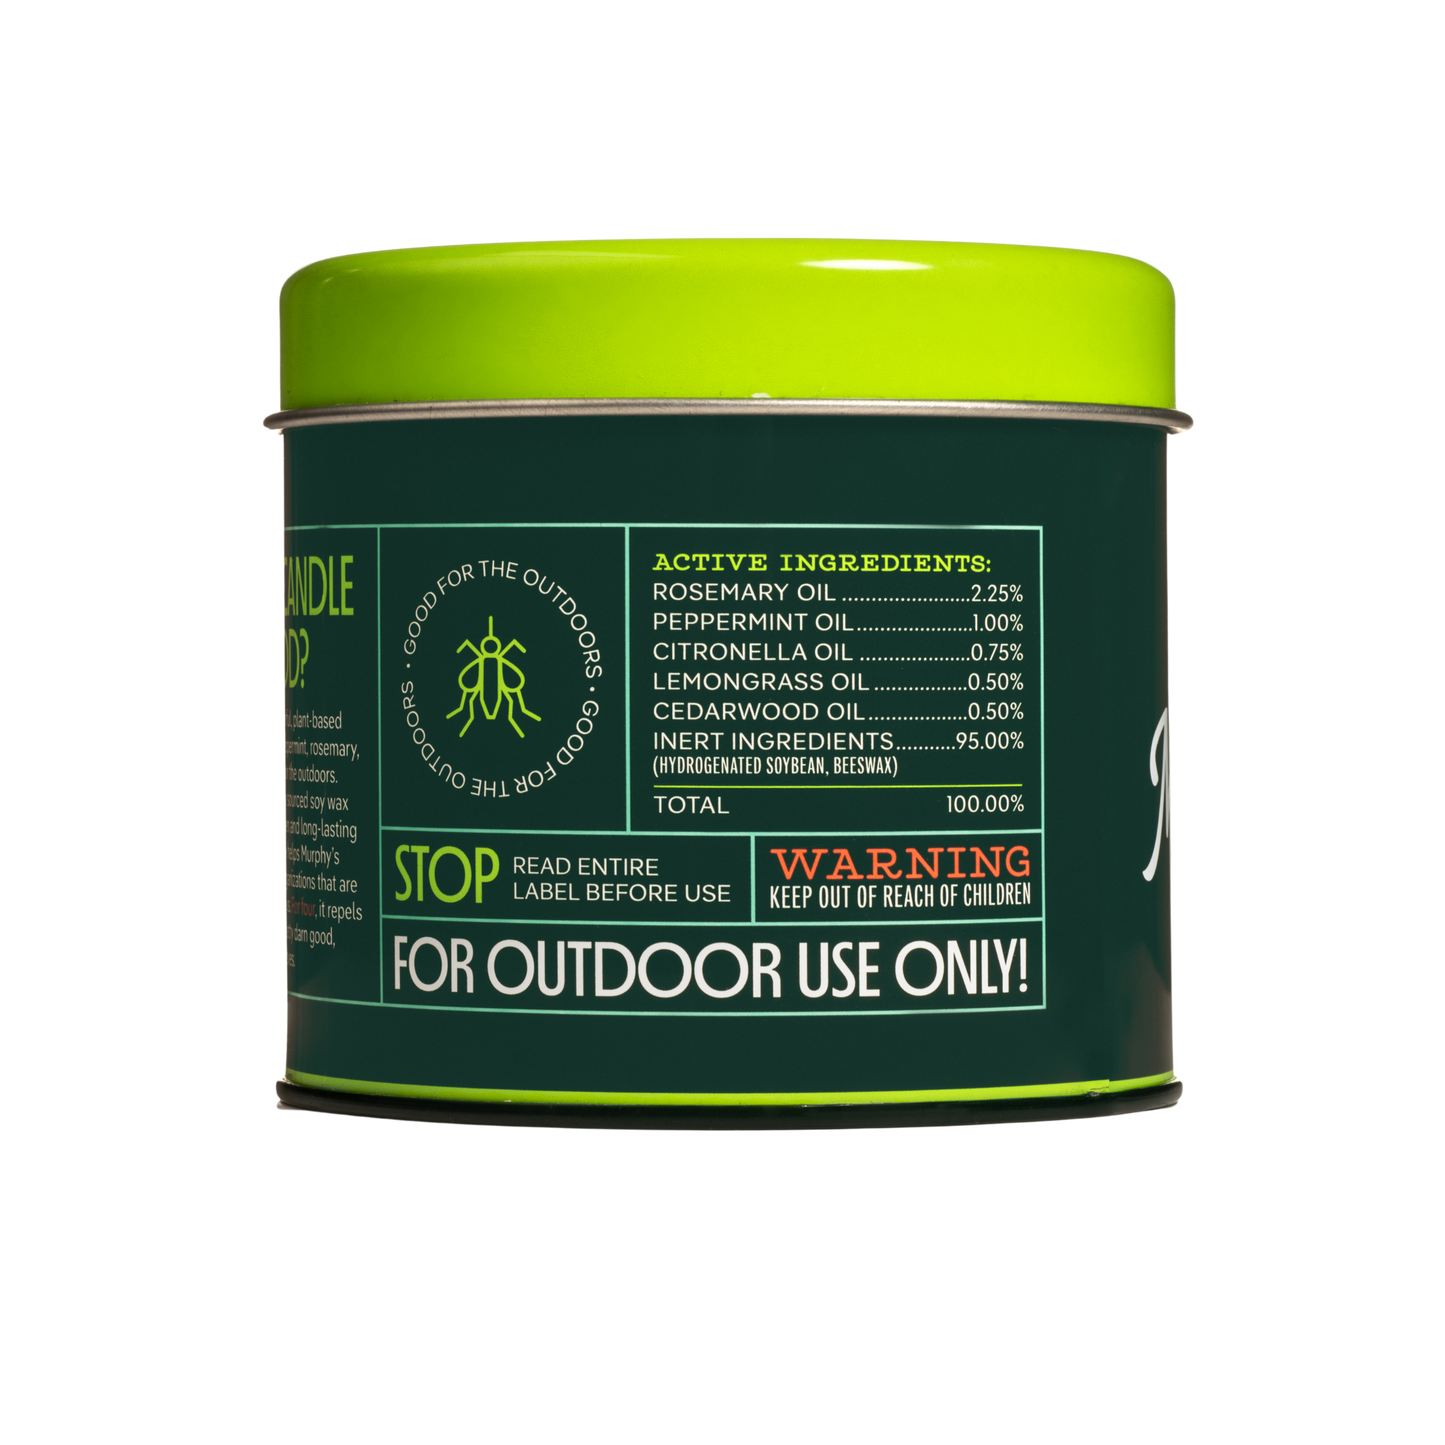 Mosquito Repellent Candle (9oz) - Display of 6